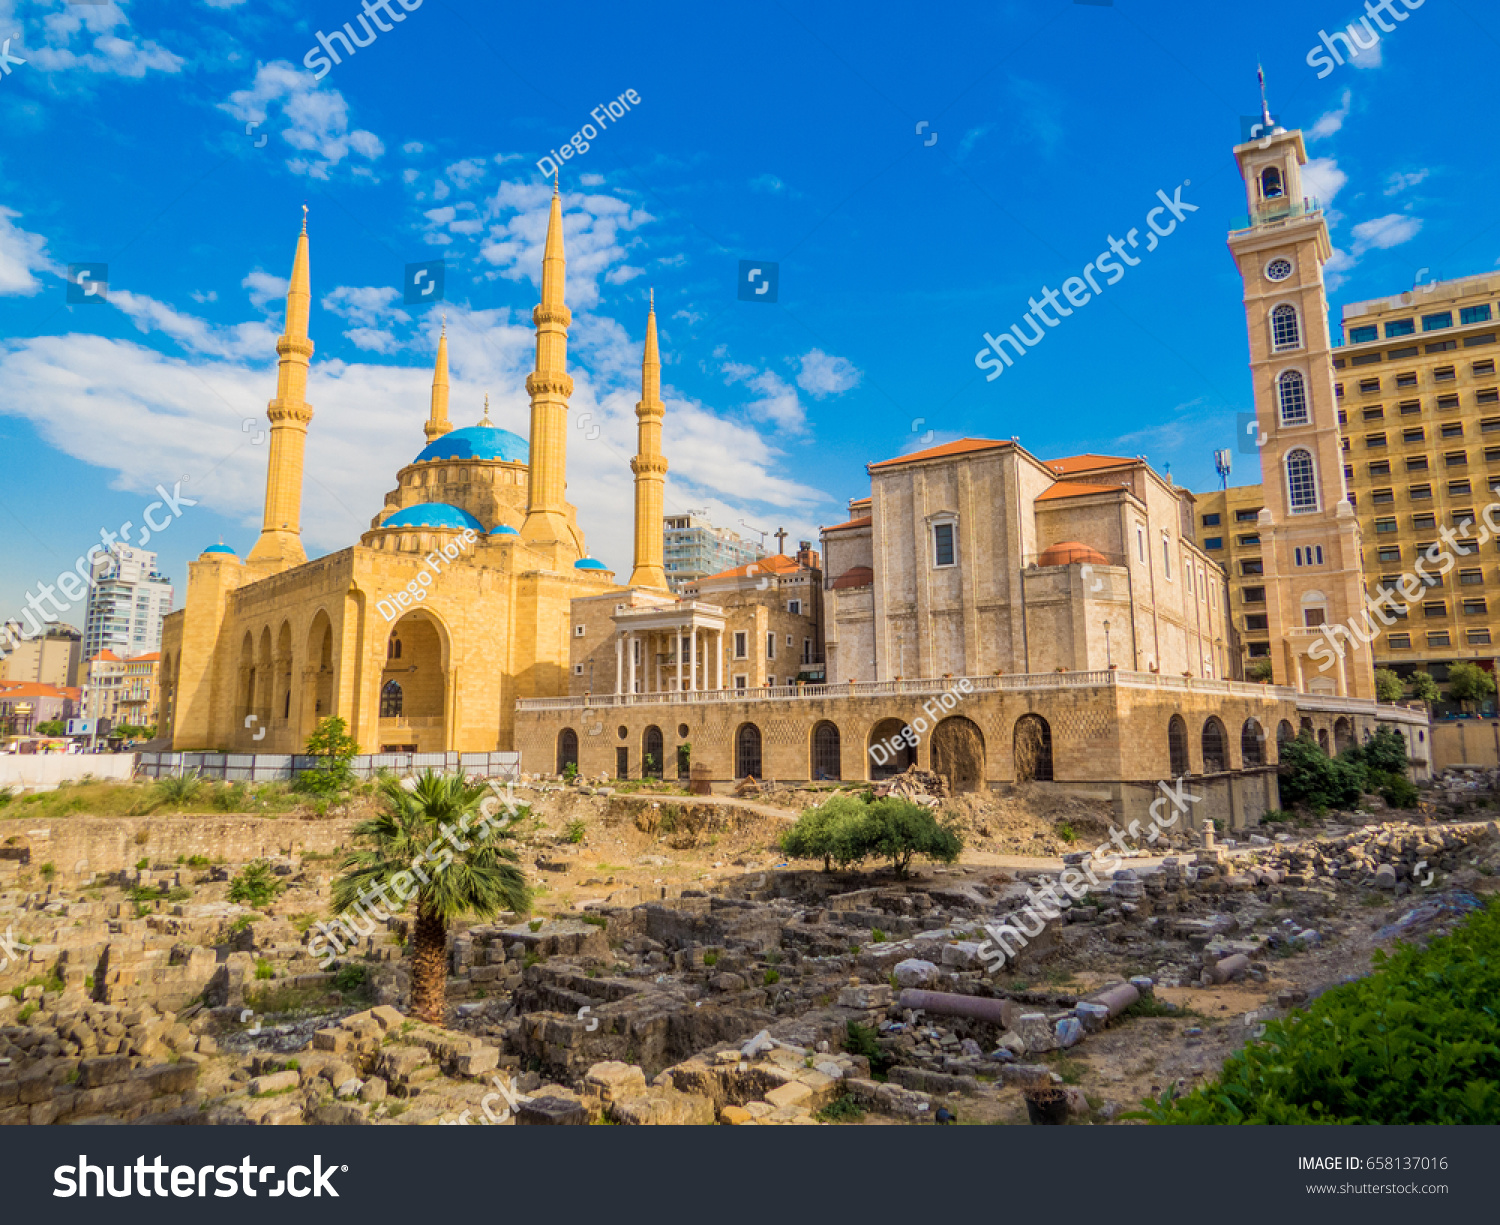 Coexistence of religions in Lebanon - Saint George Maronite Greek Orthodox Cathedral and the Mohammad Al-Amin Mosque #658137016